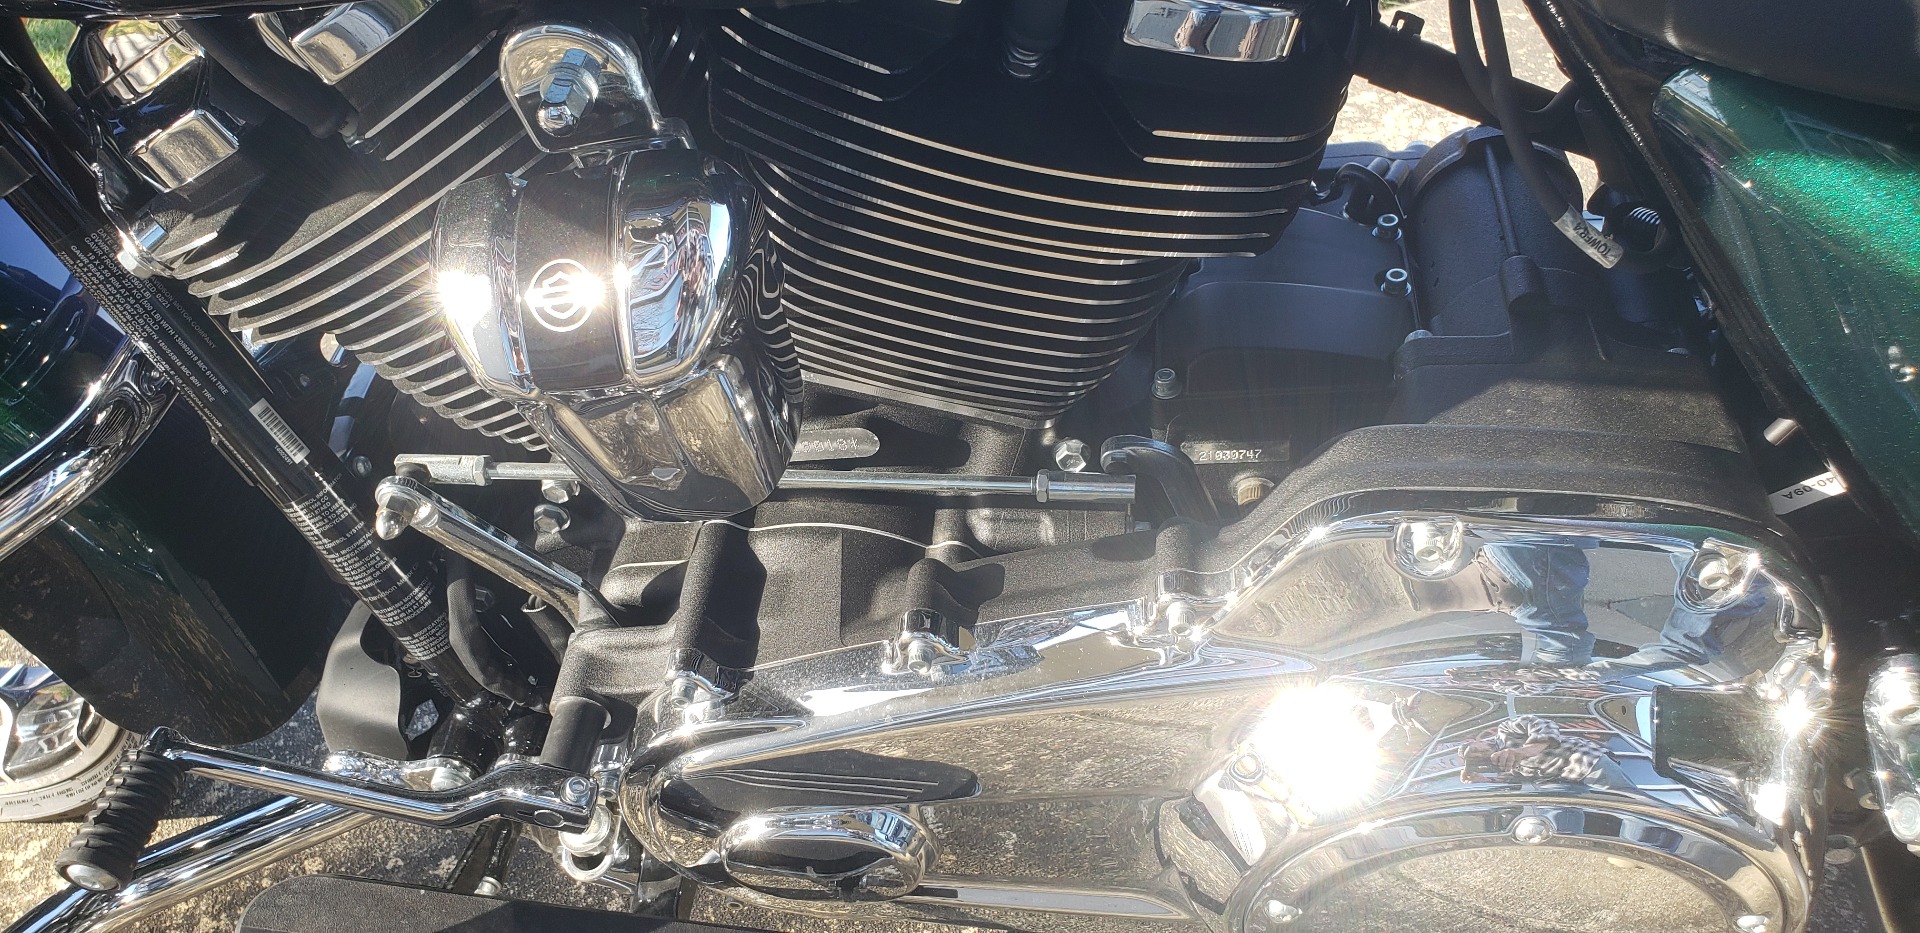 2021 Harley-Davidson ROAD GLIDE SPECIAL in Dumfries, Virginia - Photo 13